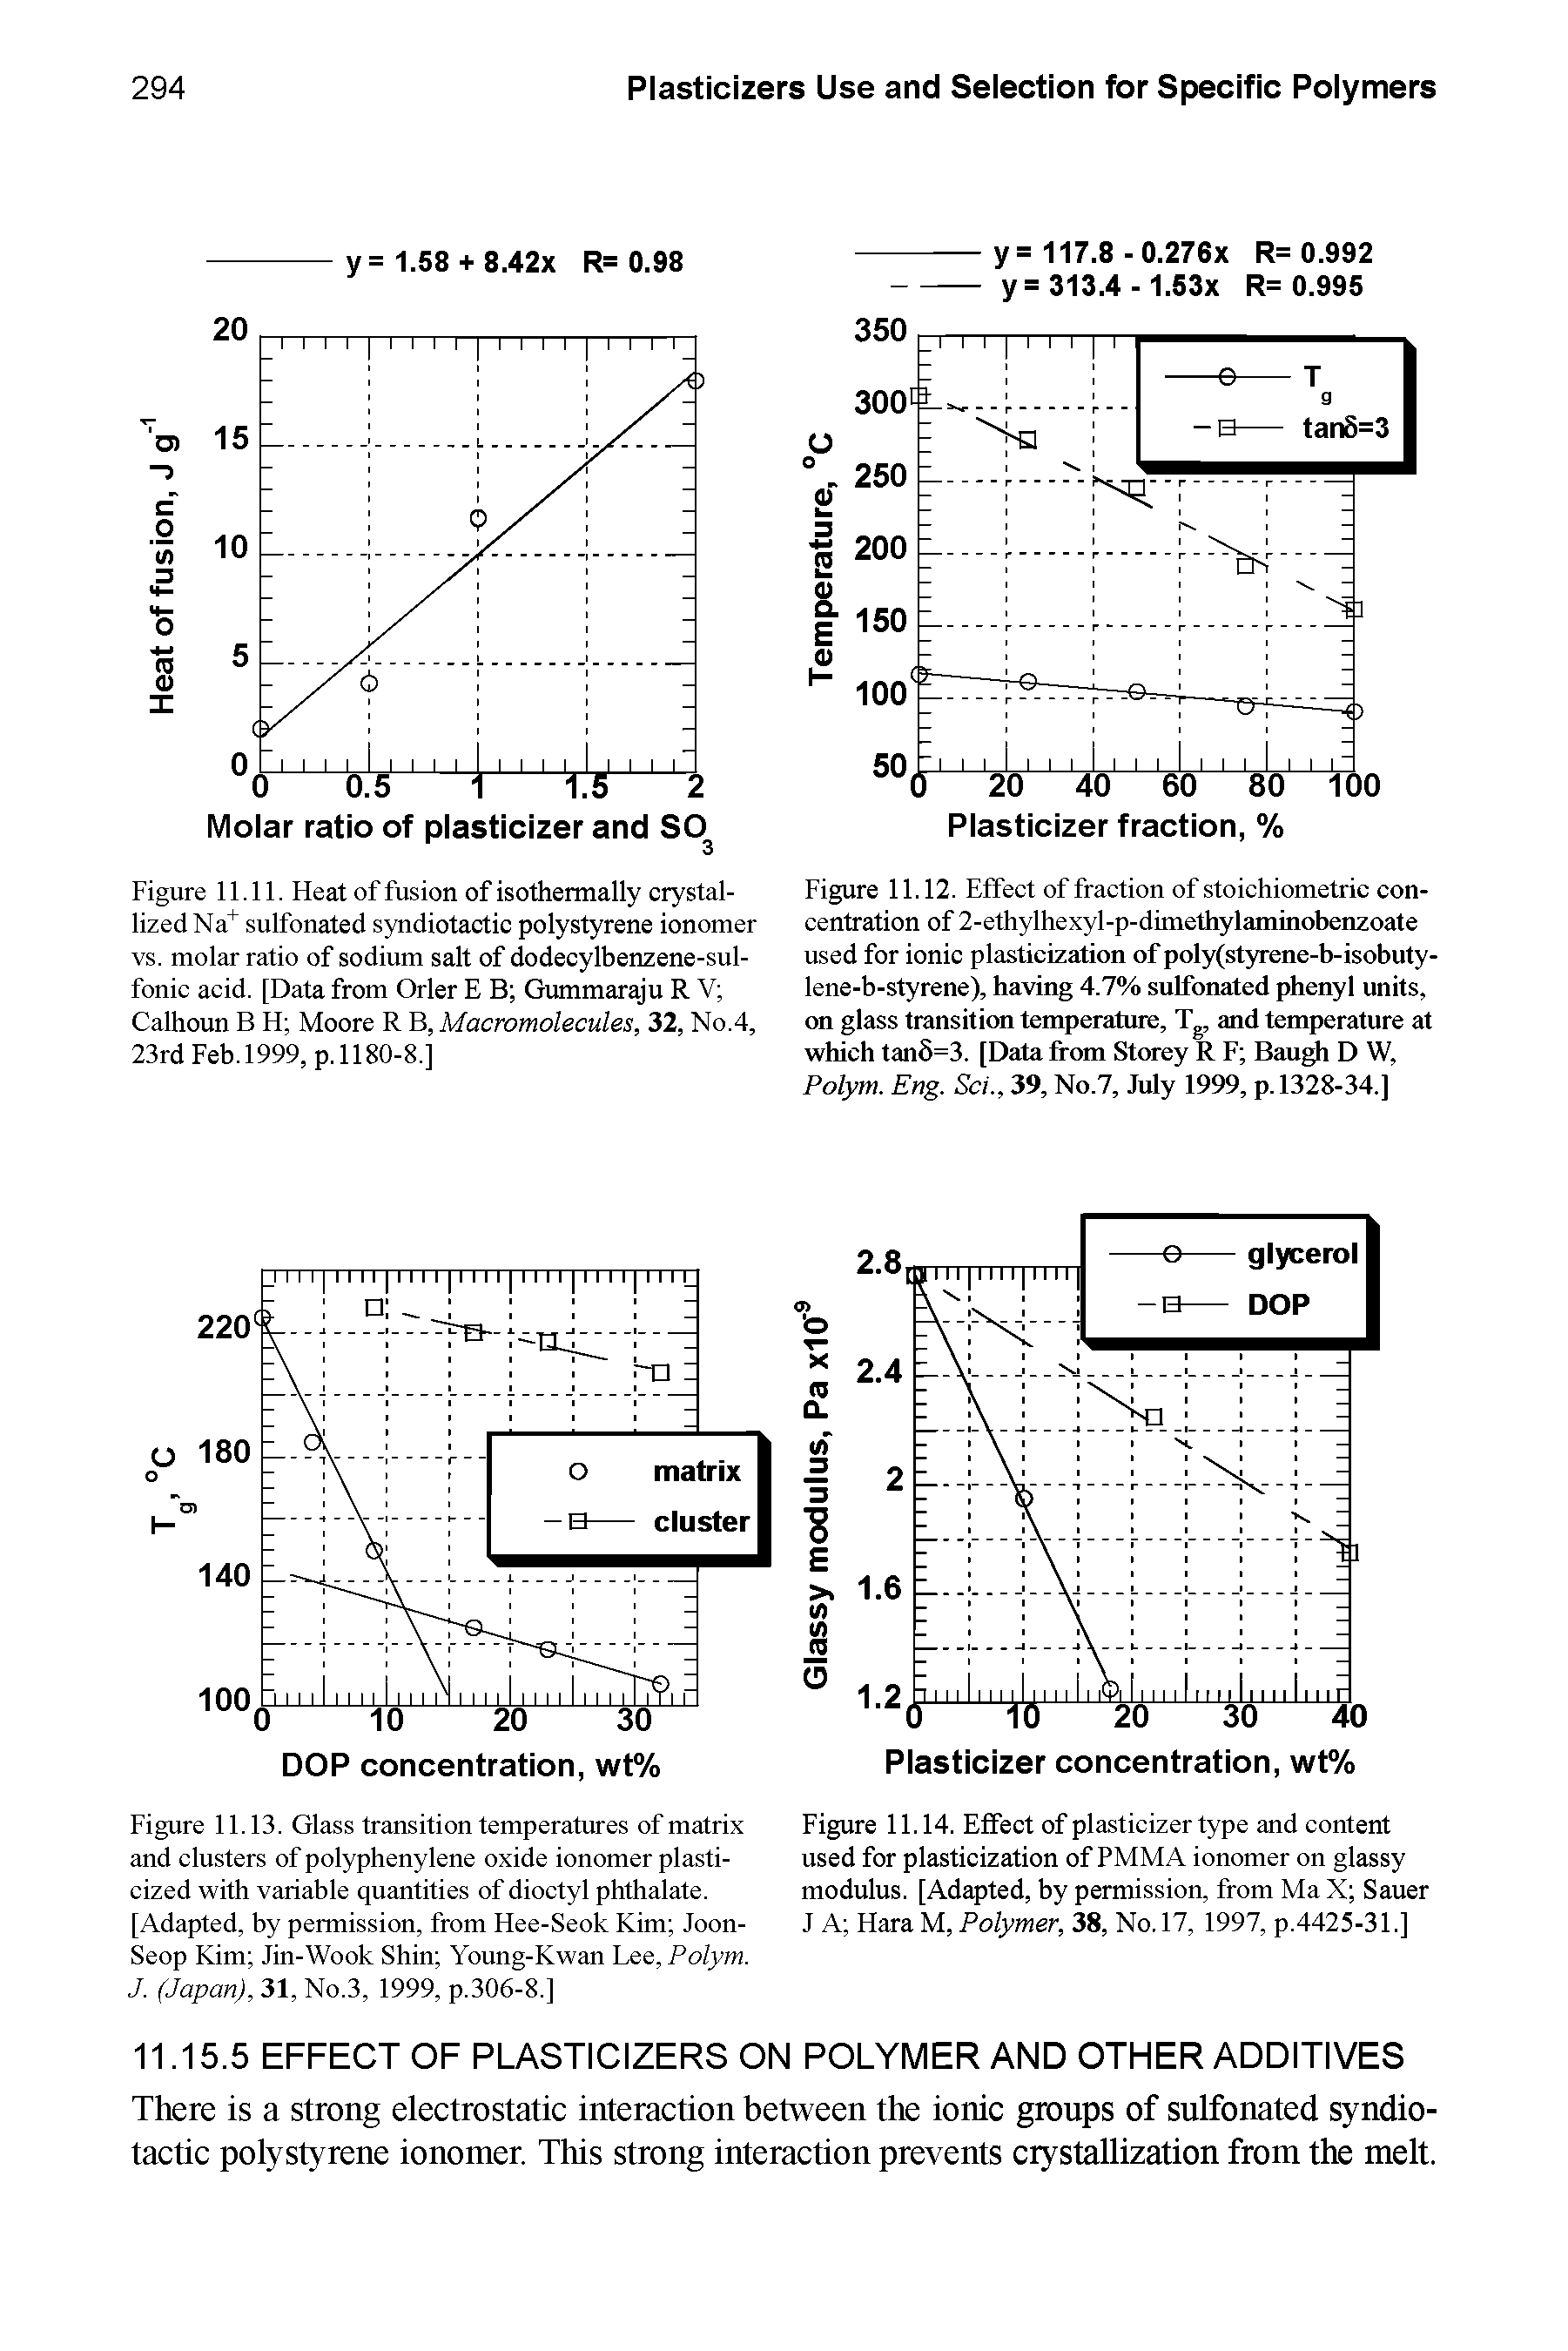 Figure 11.14. Effect of plasticizer type and content used for plasticization of PMMA ionomer on glassy modulus. [Adapted, by permission, from Ma X Sauer J A Kara M, Polymer, 38, No, 17, 1997, p.4425-31.]...